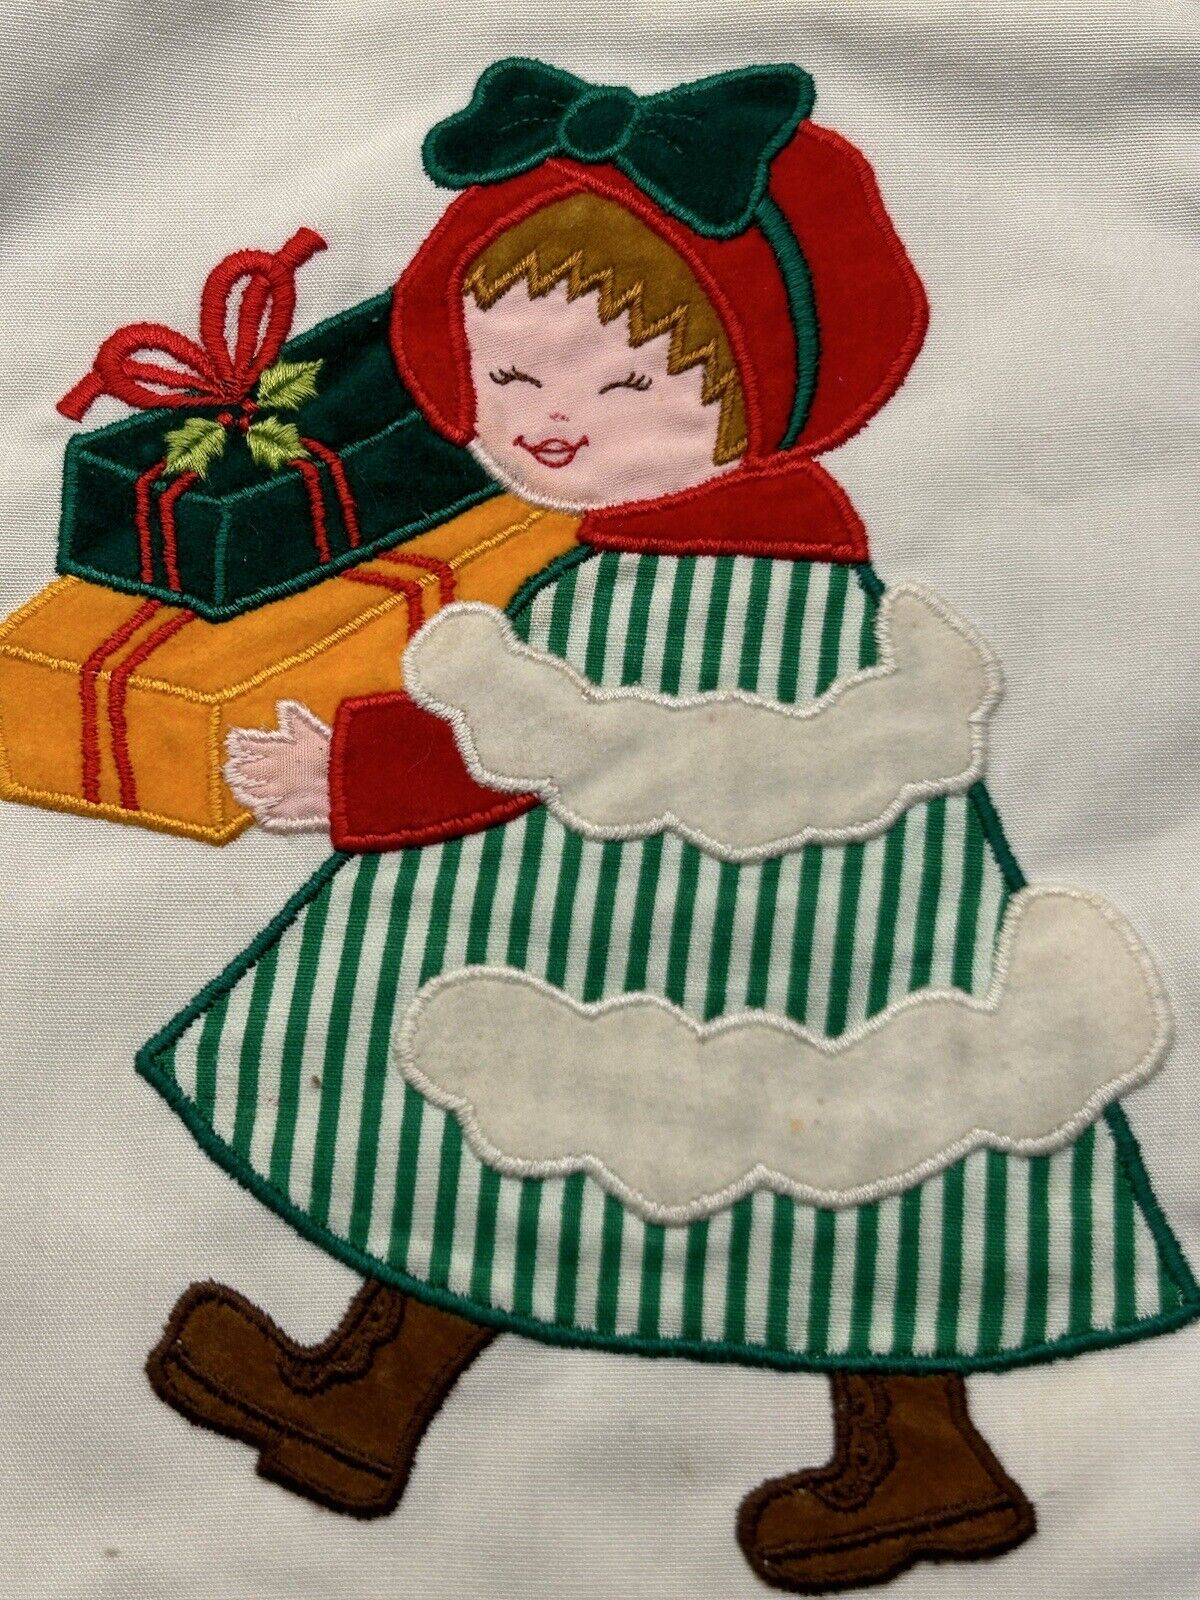 Vintage Christmas Stocking Patchwork Designs Philippines Little Girl Green Red